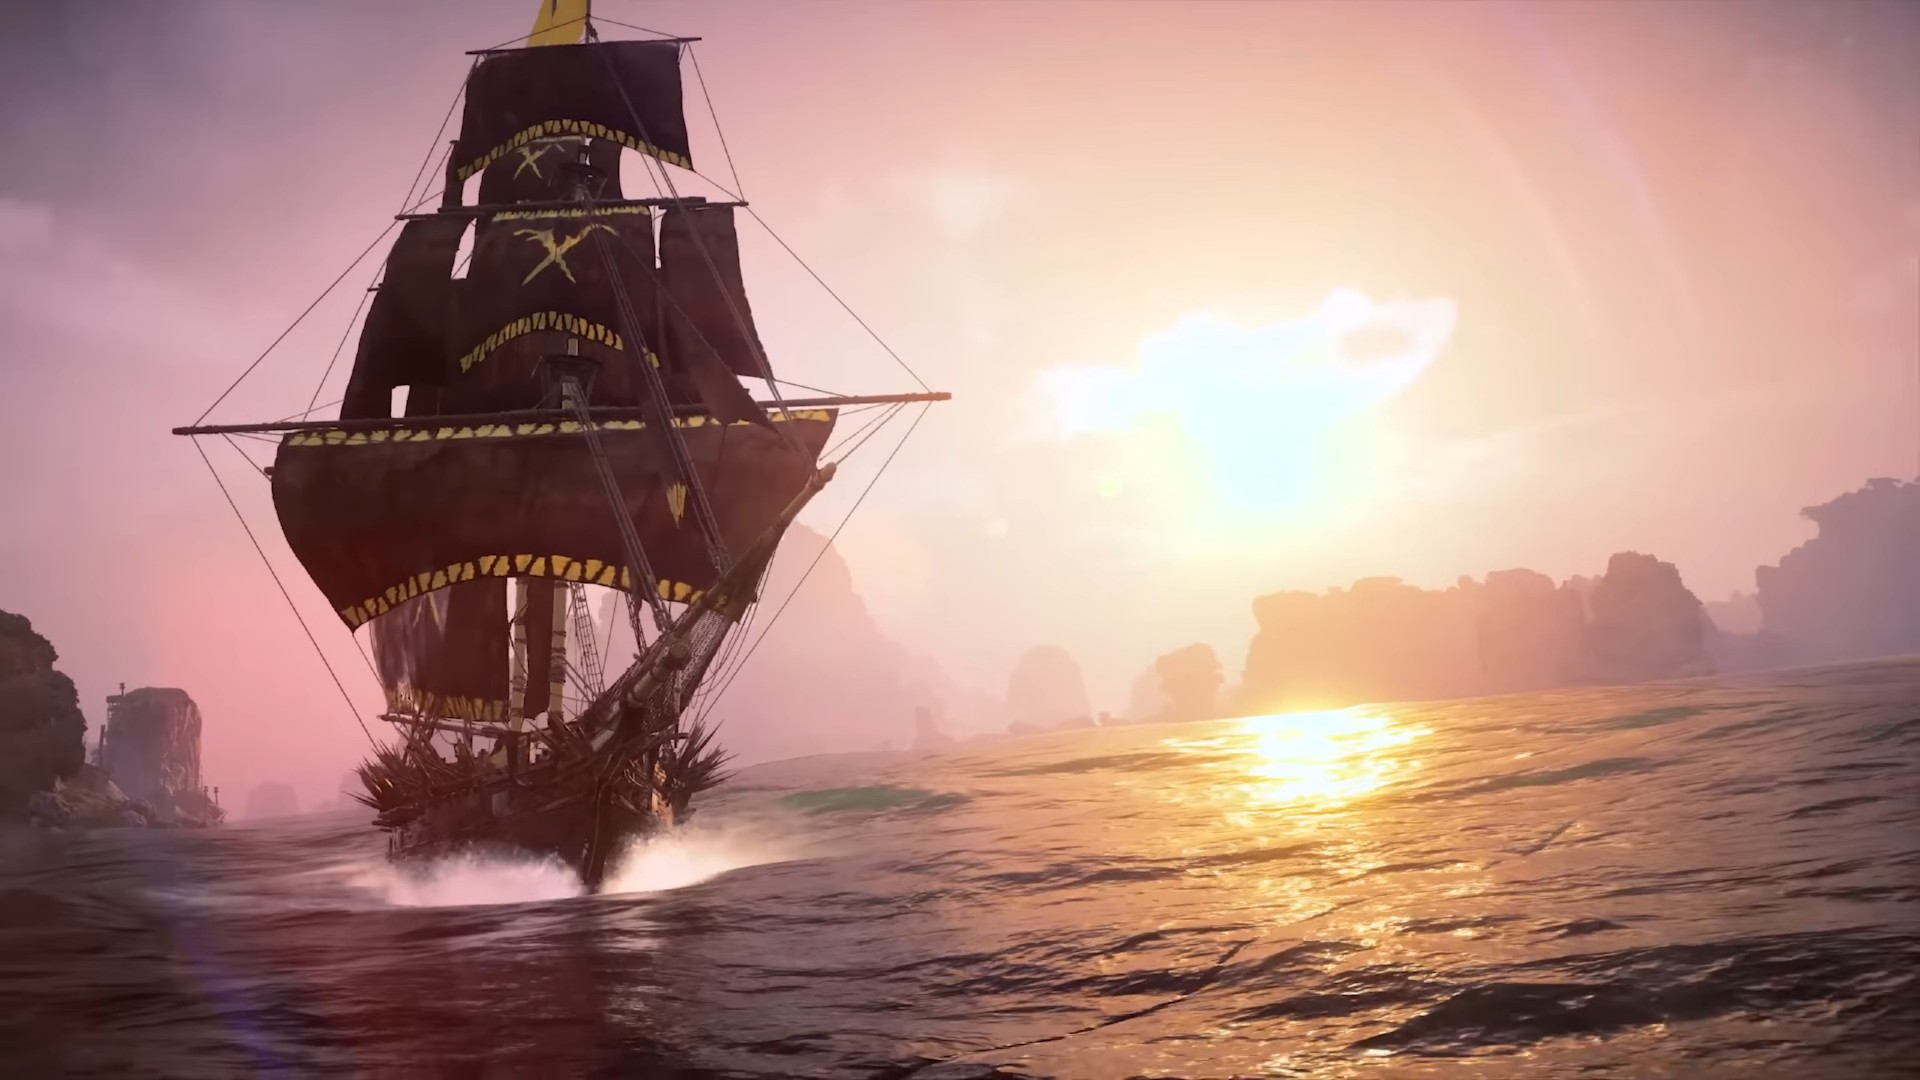 Skull & Bones loadouts will let you create the perfect pirate ship